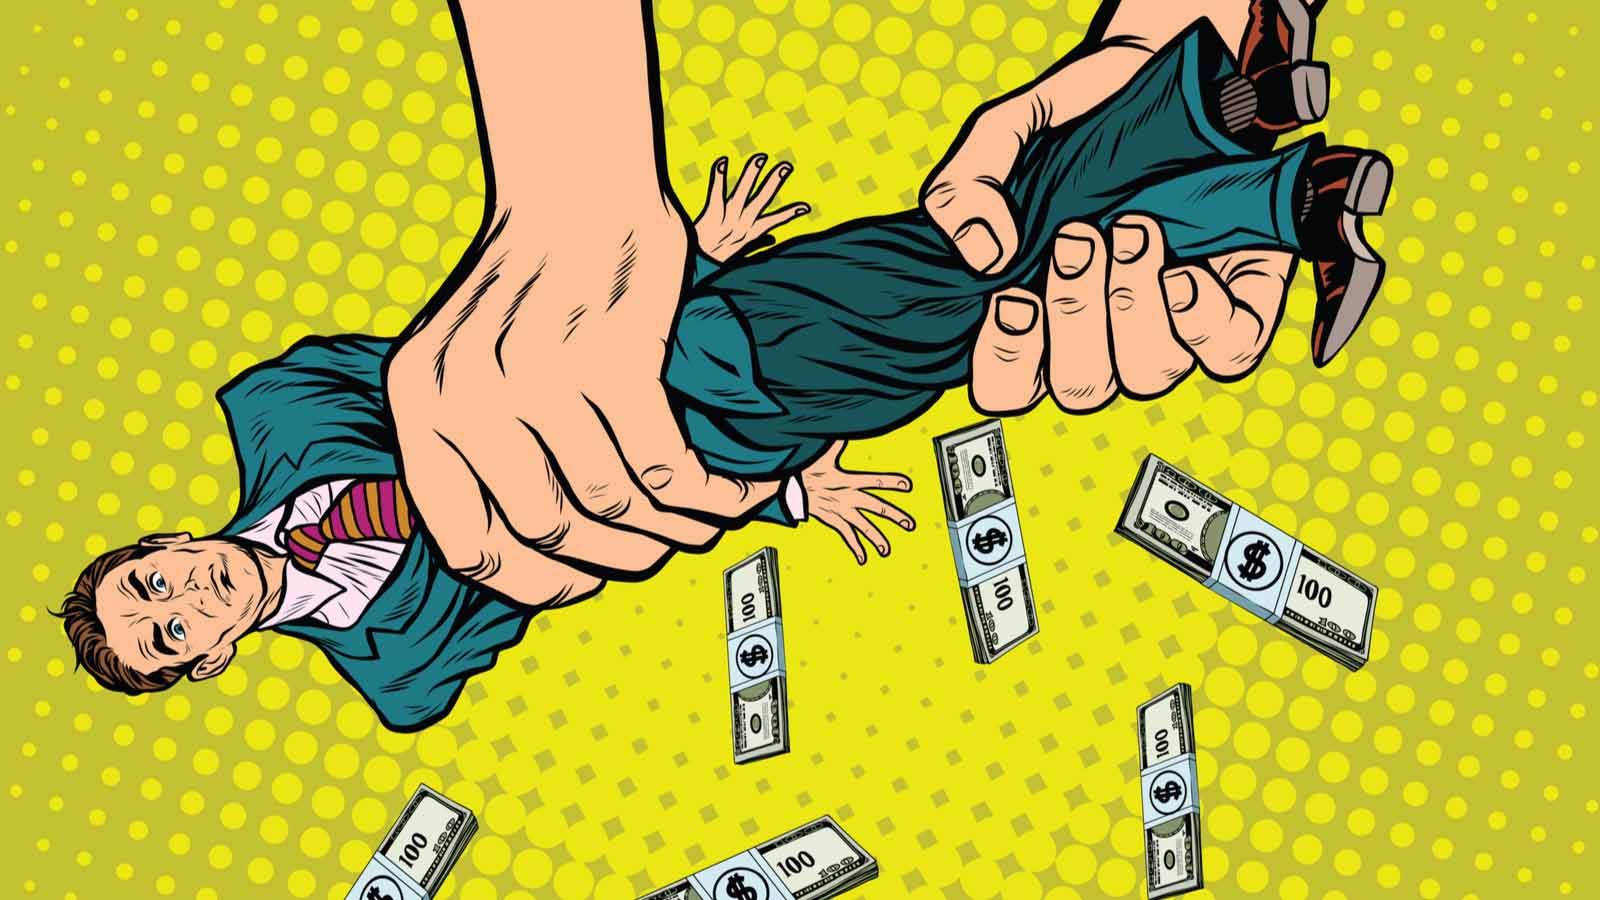 short-squeeze stocks illustration of a person wringing out a business man on a yellow cartoon backdrop with dollar bills falling